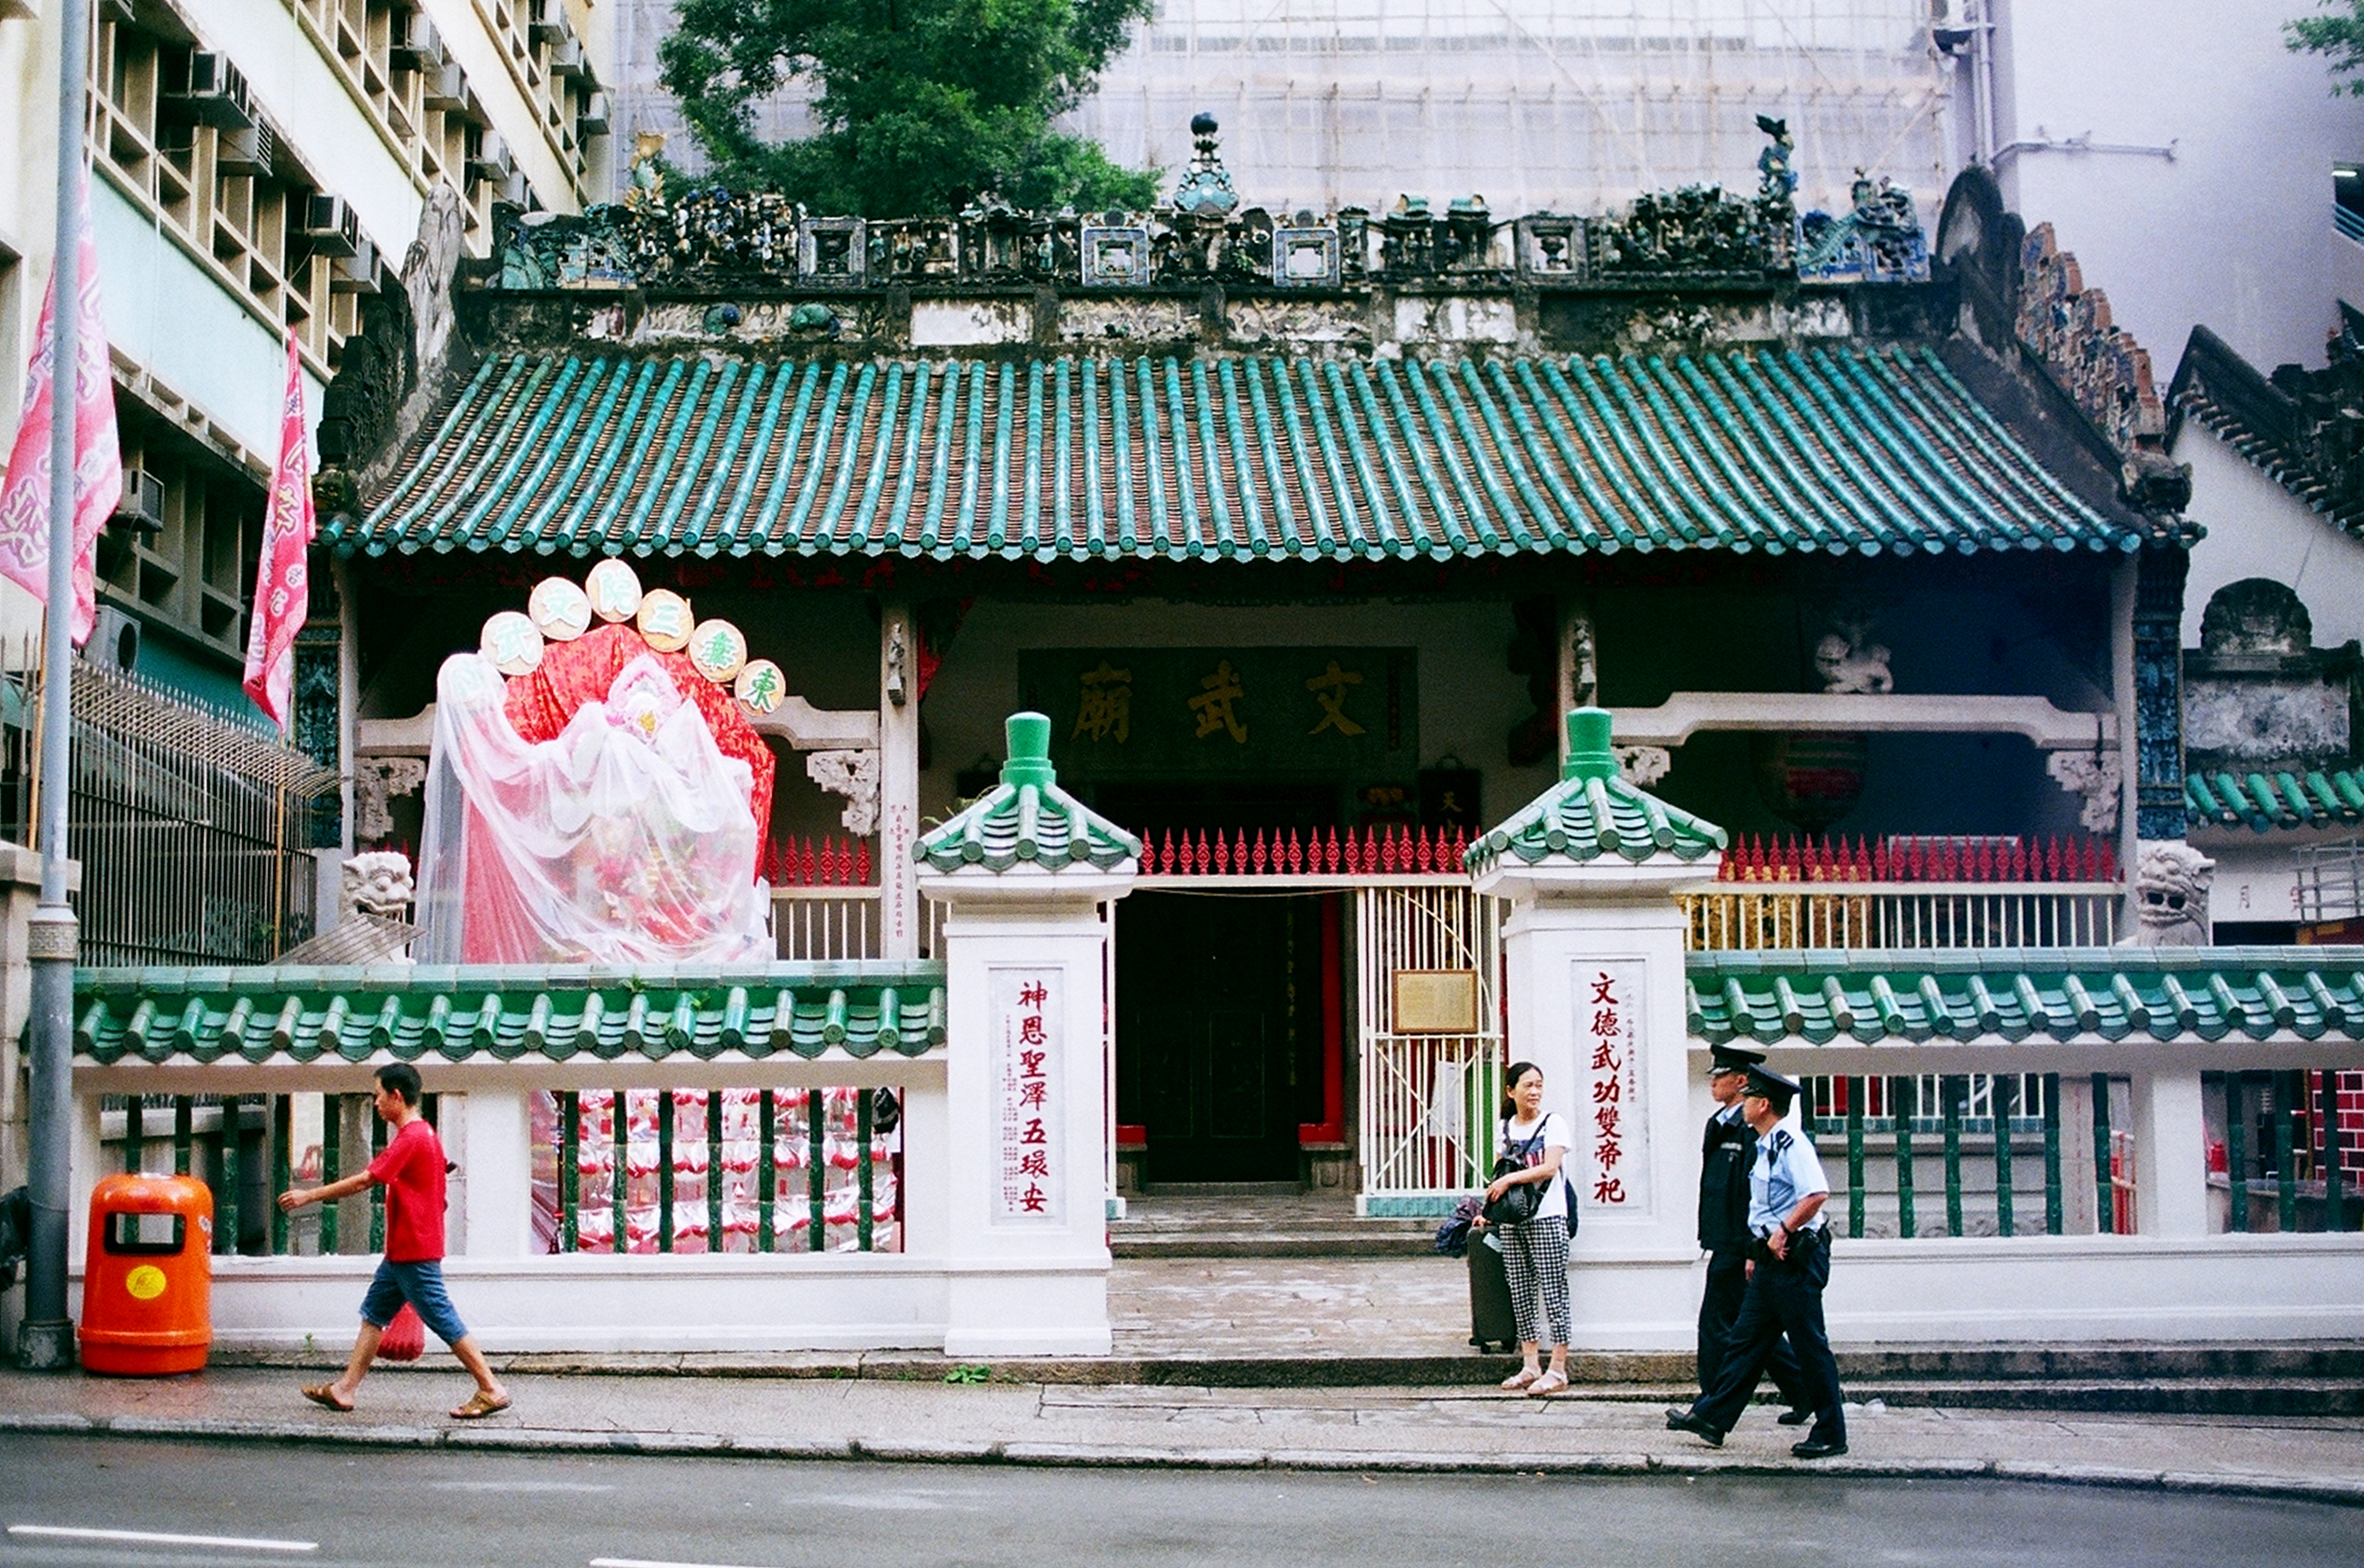 This historical landmark is one of the only authentically standing temples in the Central district